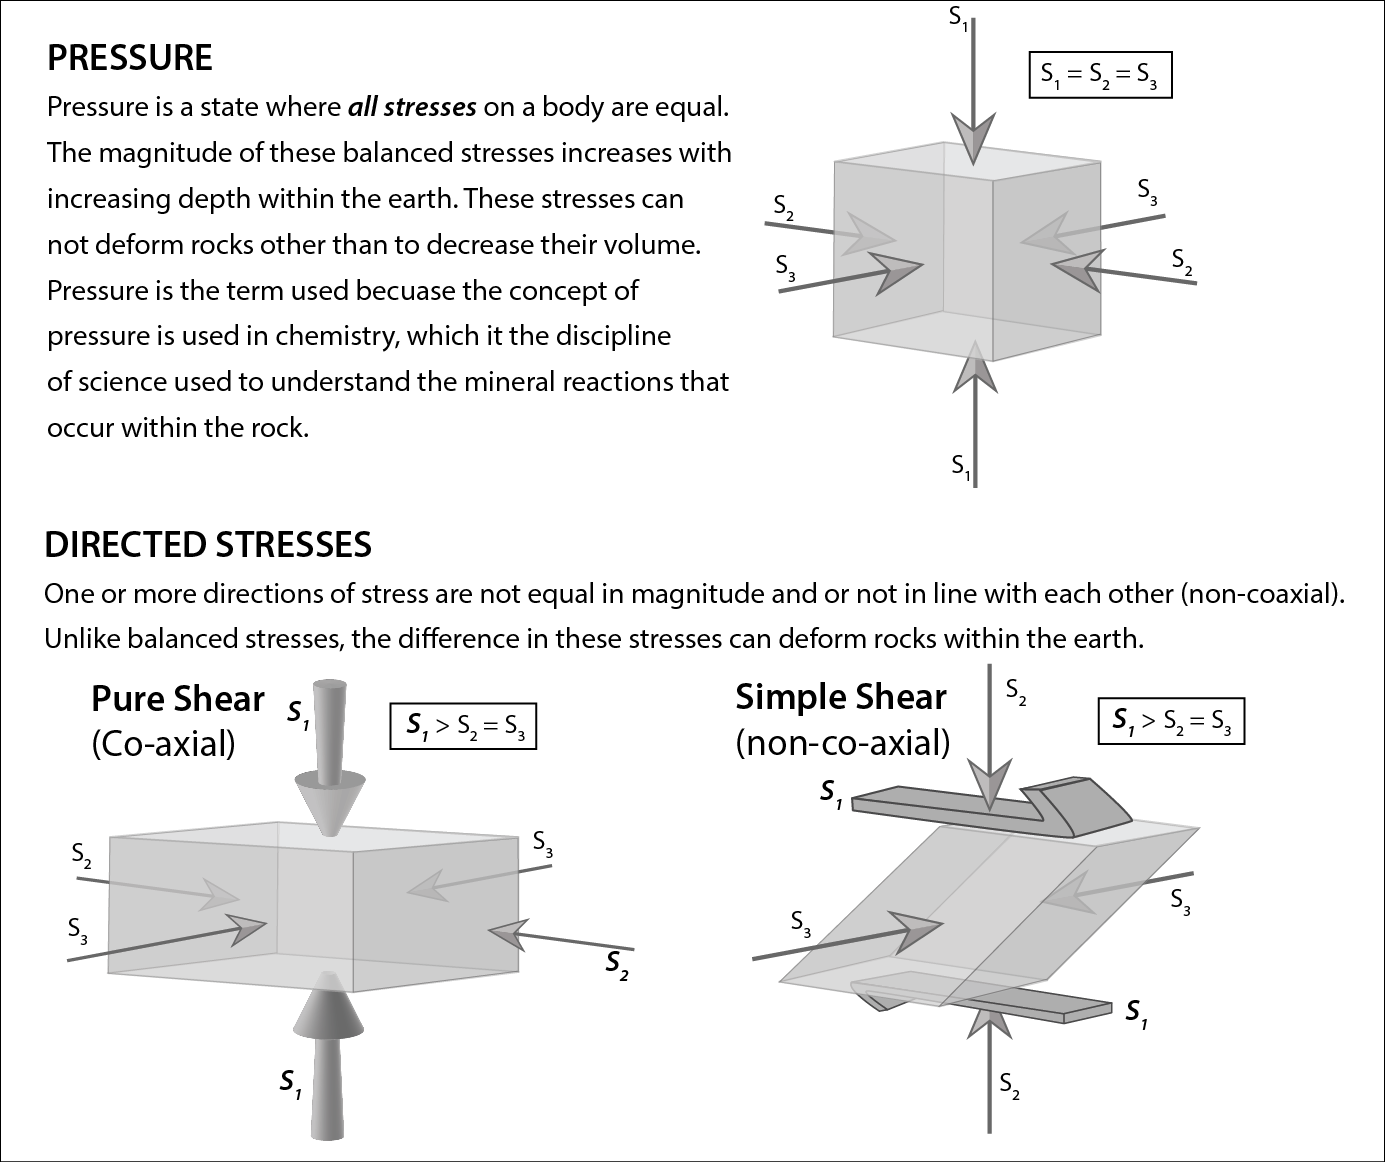 Three 3-D diagrams: the top diagram is labeled Pressure and shows a cube with a single arrow pointing inward on each face, labeled S1, S2, and S3 which correlate with the Z-axis, Y-axis, and X-axis, respectively. The text next to this diagram says "Pressure is a state where all stresses on a body are equal. The magnitude of these balanced stresses increases with increasing depth within the earth. These stresses can not deform rocks other than to decrease their volume. Pressure is the term used because the concept of pressure is used in chemistry, which it the discipline of science used to understand the mineral reactions that occur within the rock." The lower two diagrams are labeled Directed Stresses with the accompanying text "One or more directions of stress are not equal in magnitude and or not in line with each other (non-coaxial). Unlike balanced stresses, the difference in these stresses can deform rocks within the earth." One of these diagrams is labeled Pure Shear (co-axial) and shows a stretched cuboid with S1 arrows pointing downward toward the top face and upward toward the bottom face; the other diagram is labeled Simple Shear (non-co-axial) and shows a sheared cube with S1 shear force arrows parallel to the top and bottom faces pointed in opposite directions; for both of these diagrams, S1 is greater than S2 and S3, with S2 equaling S3.